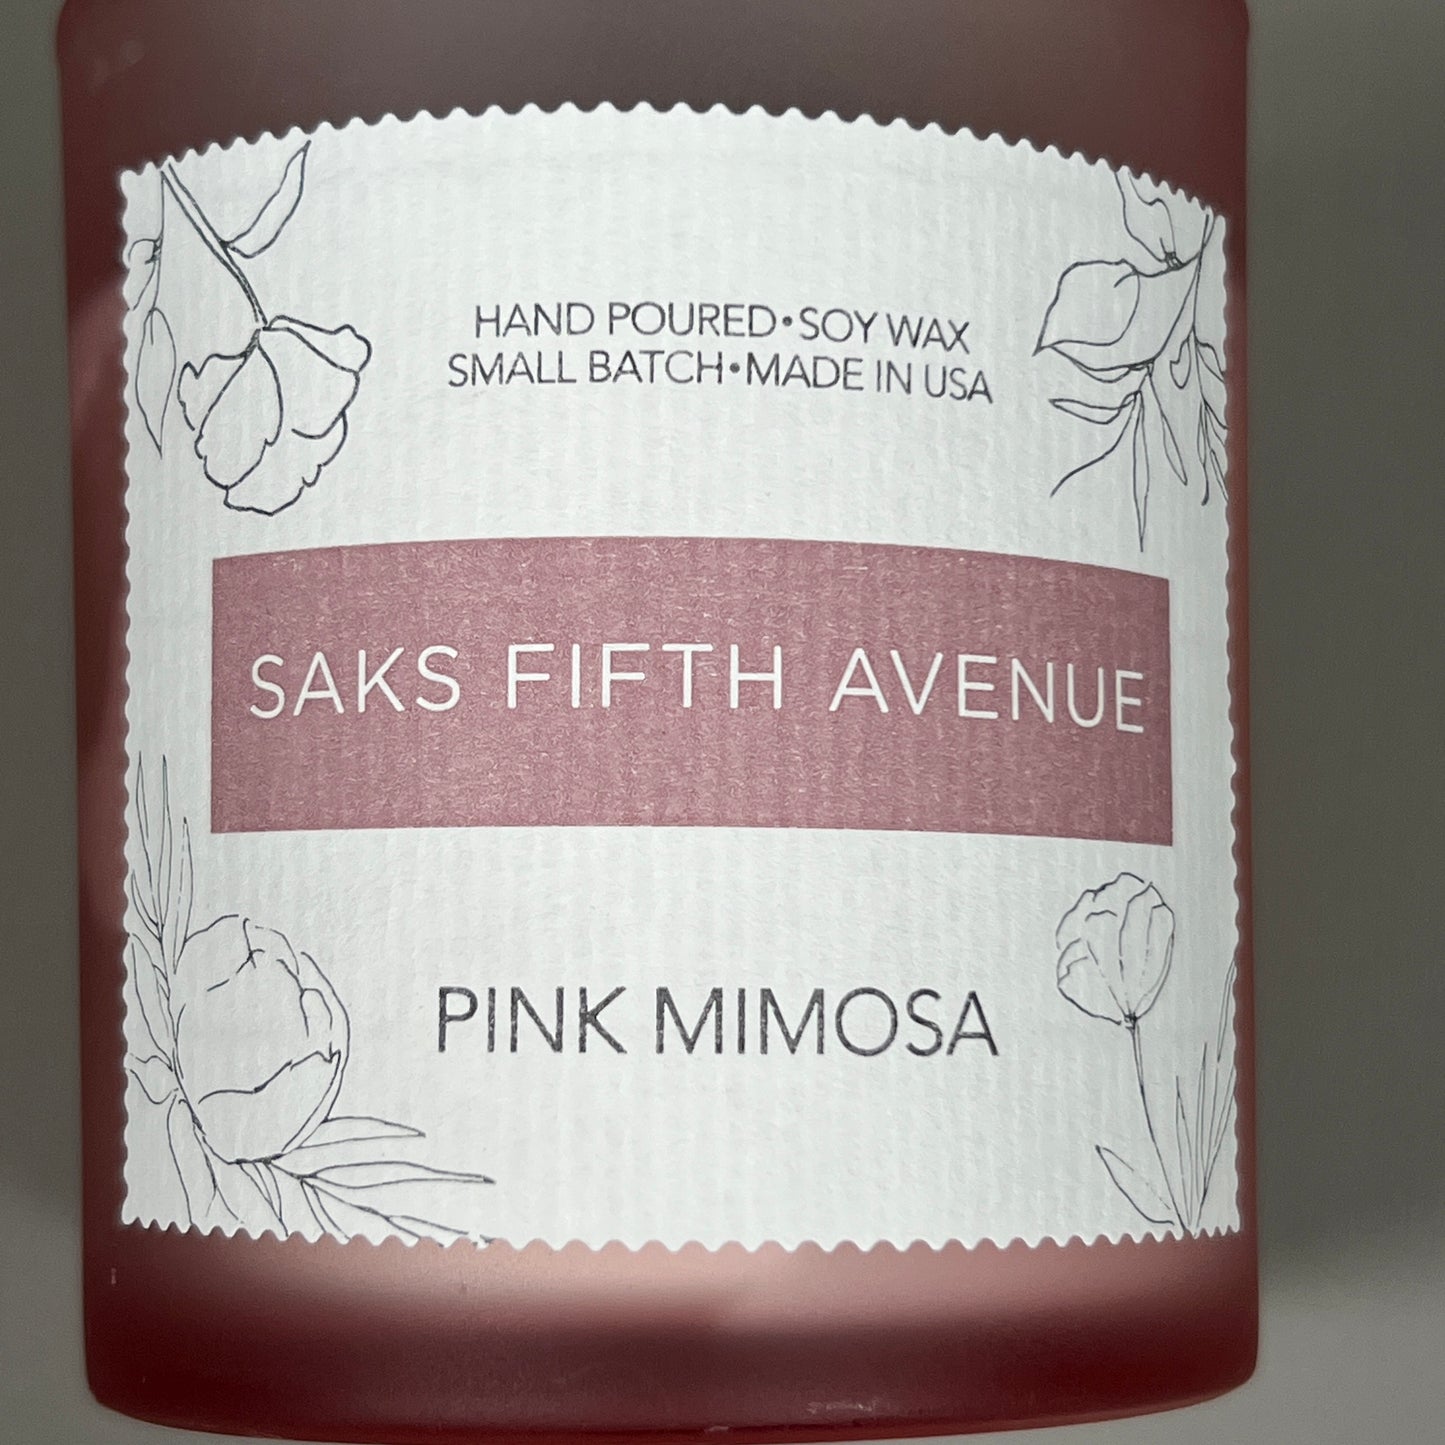 SAKS FIFTH AVENUE Pink Mimosa Hand Poured Soy Wax Candle 8 fl oz (New)